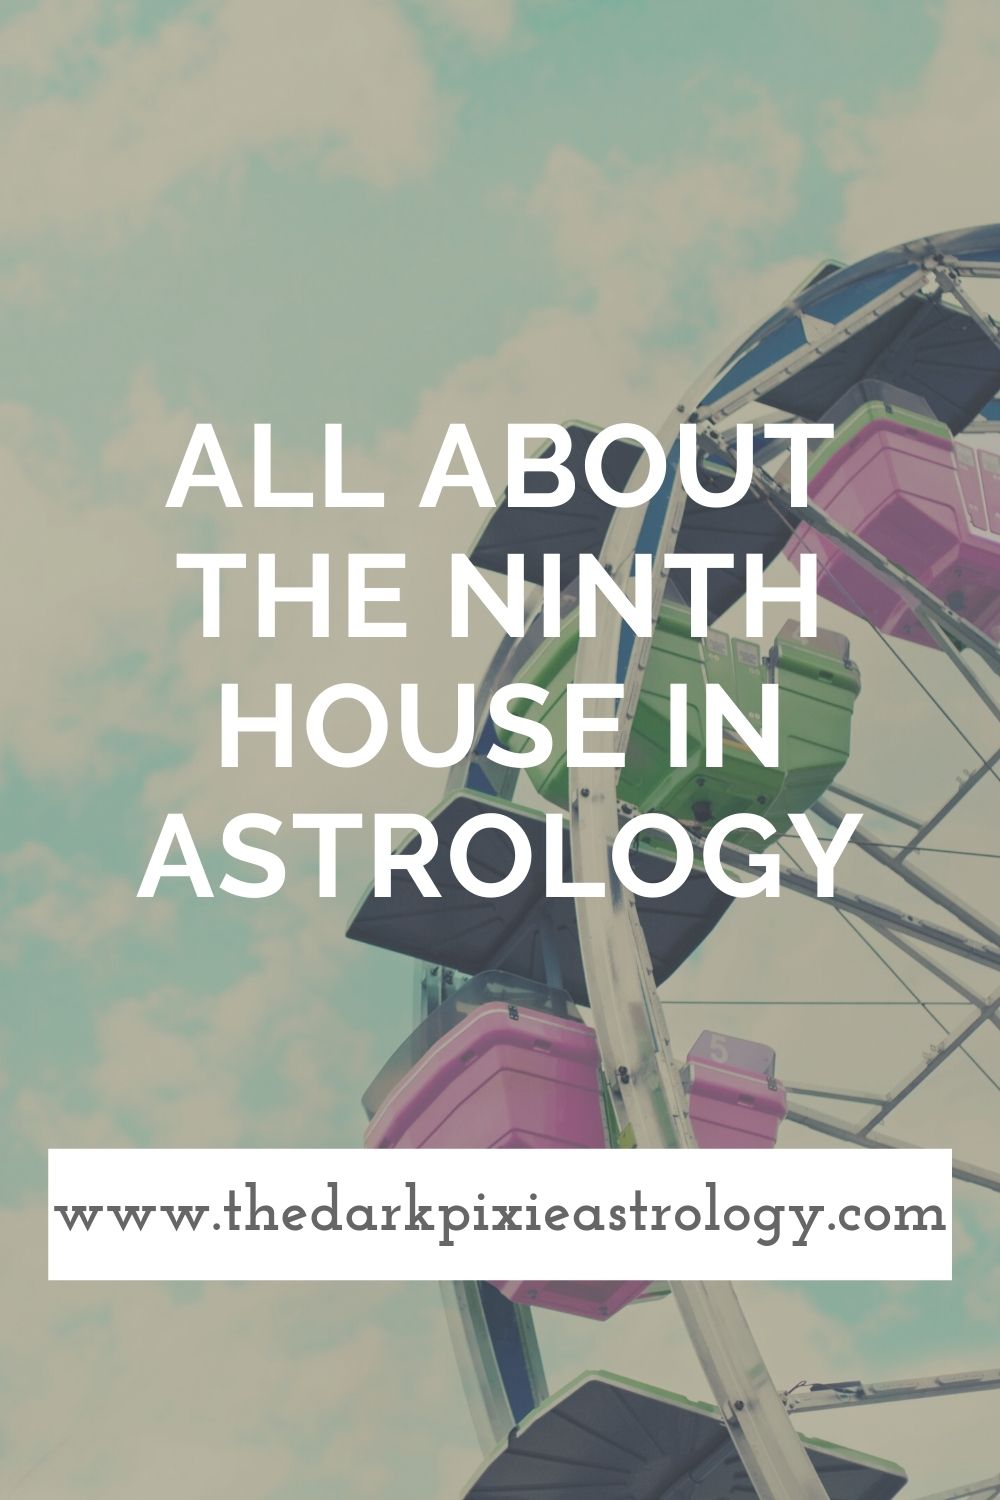 All About the Ninth House in Astrology - The Dark Pixie Astrology